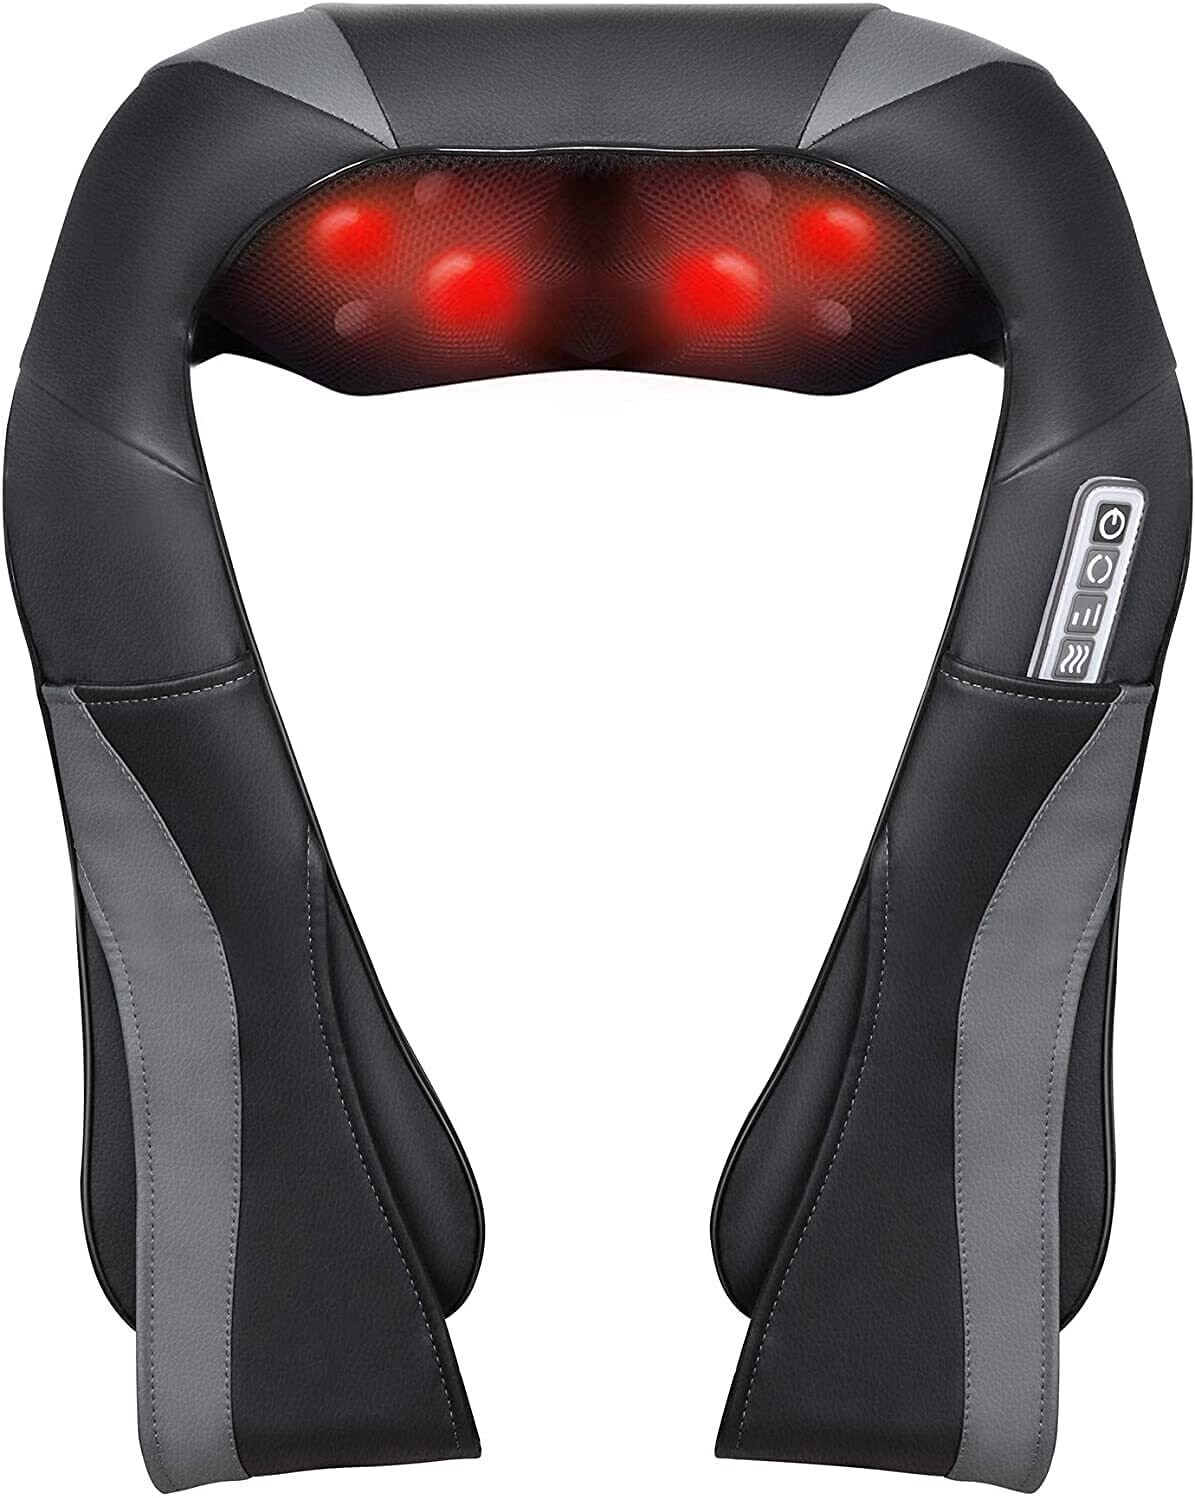 Neck and Shoulder Massager with Heat